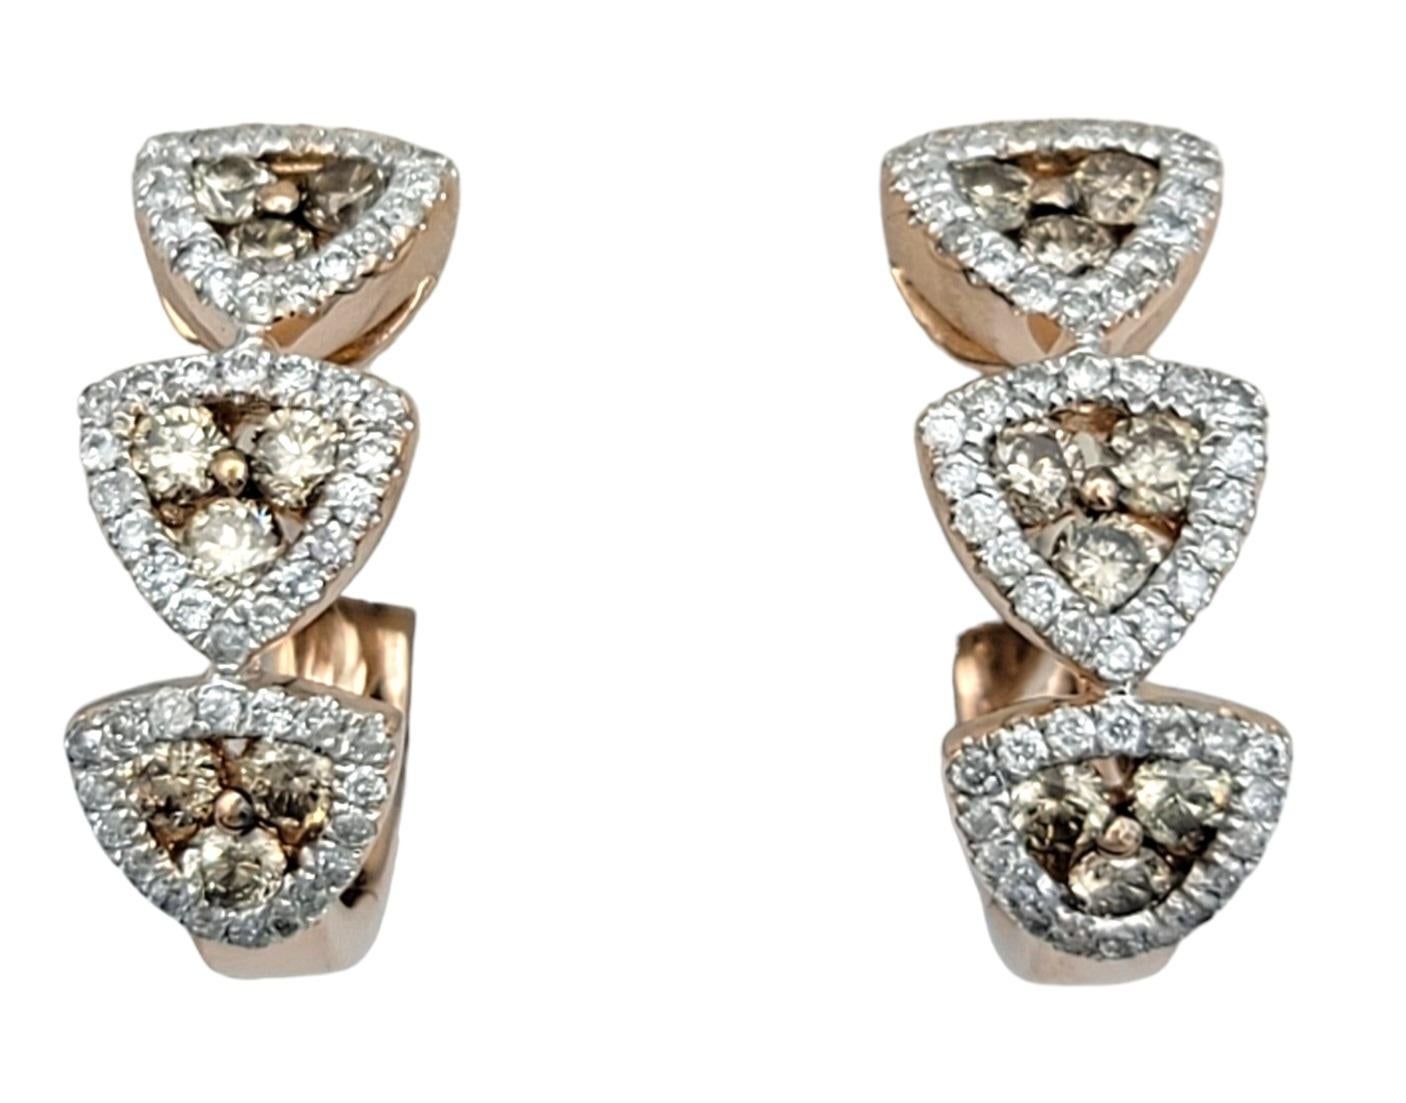 These captivating hoop earrings crafted in 14 karat rose gold are a stunning work of art. Each earring features a trio of striking triangles adorned with champagne / light brown diamonds surrounded by bright white diamonds, creating a mesmerizing